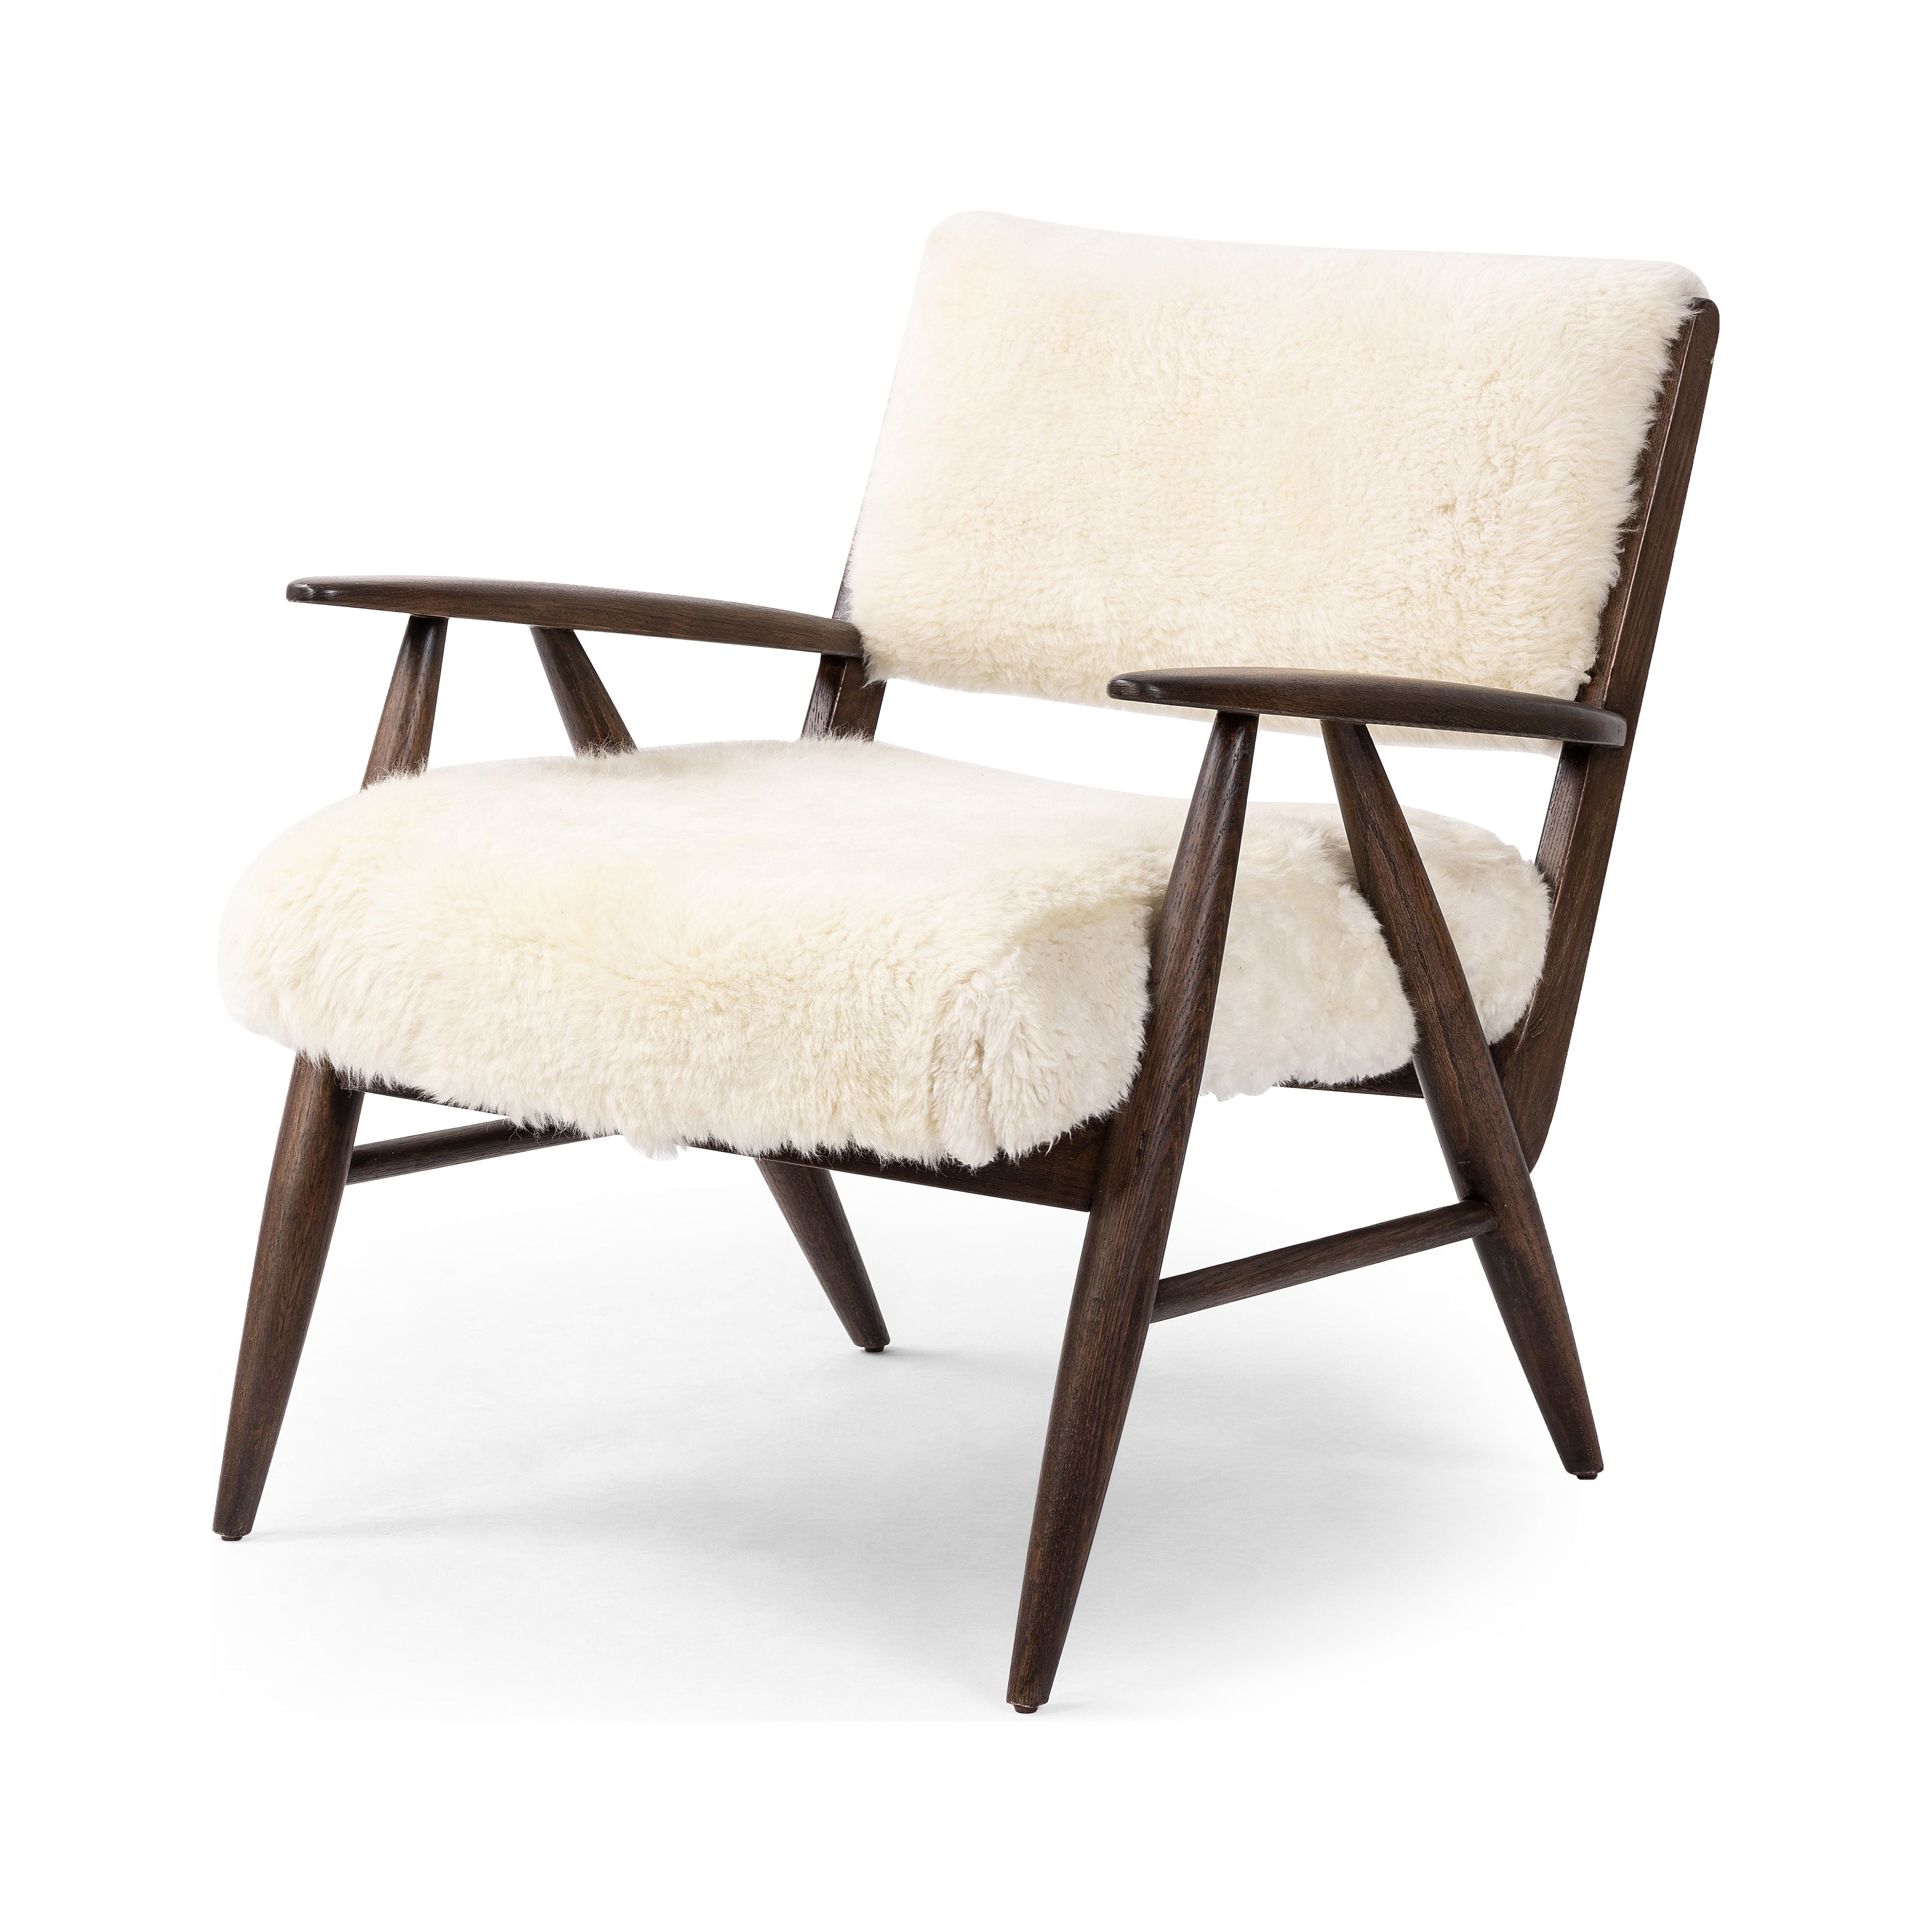 A modern take on the vintage school chair, upholstered in plush cream shearling of 100% sheepskin. Perfect as an accent chair or in pairs. Amethyst Home provides interior design, new construction, custom furniture, and area rugs in the Austin metro area.